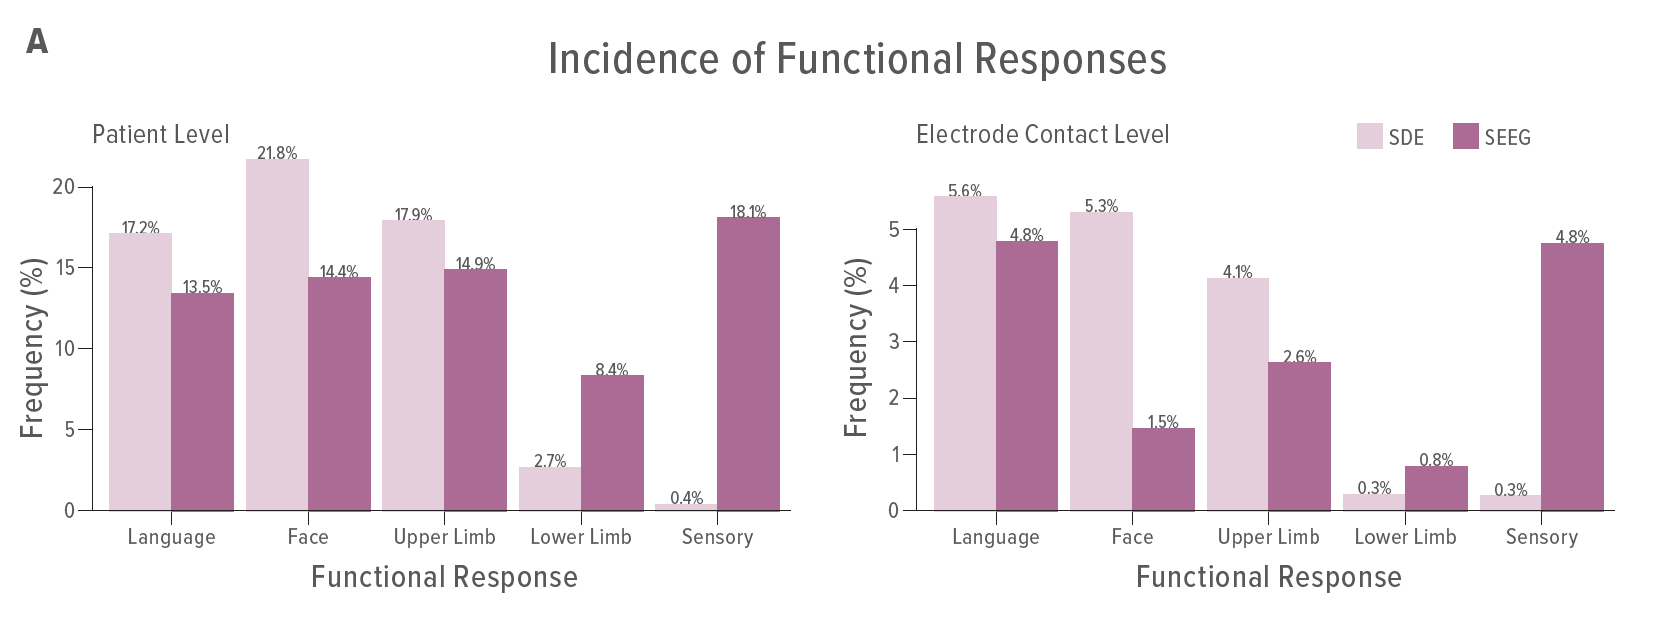 The proportion of patients (left panel) and stimulated contacts (right panel) with different functional responses are shown for stereoelectroencephalographic (SEEG) and subdural electrode (SDE) electrical stimulations